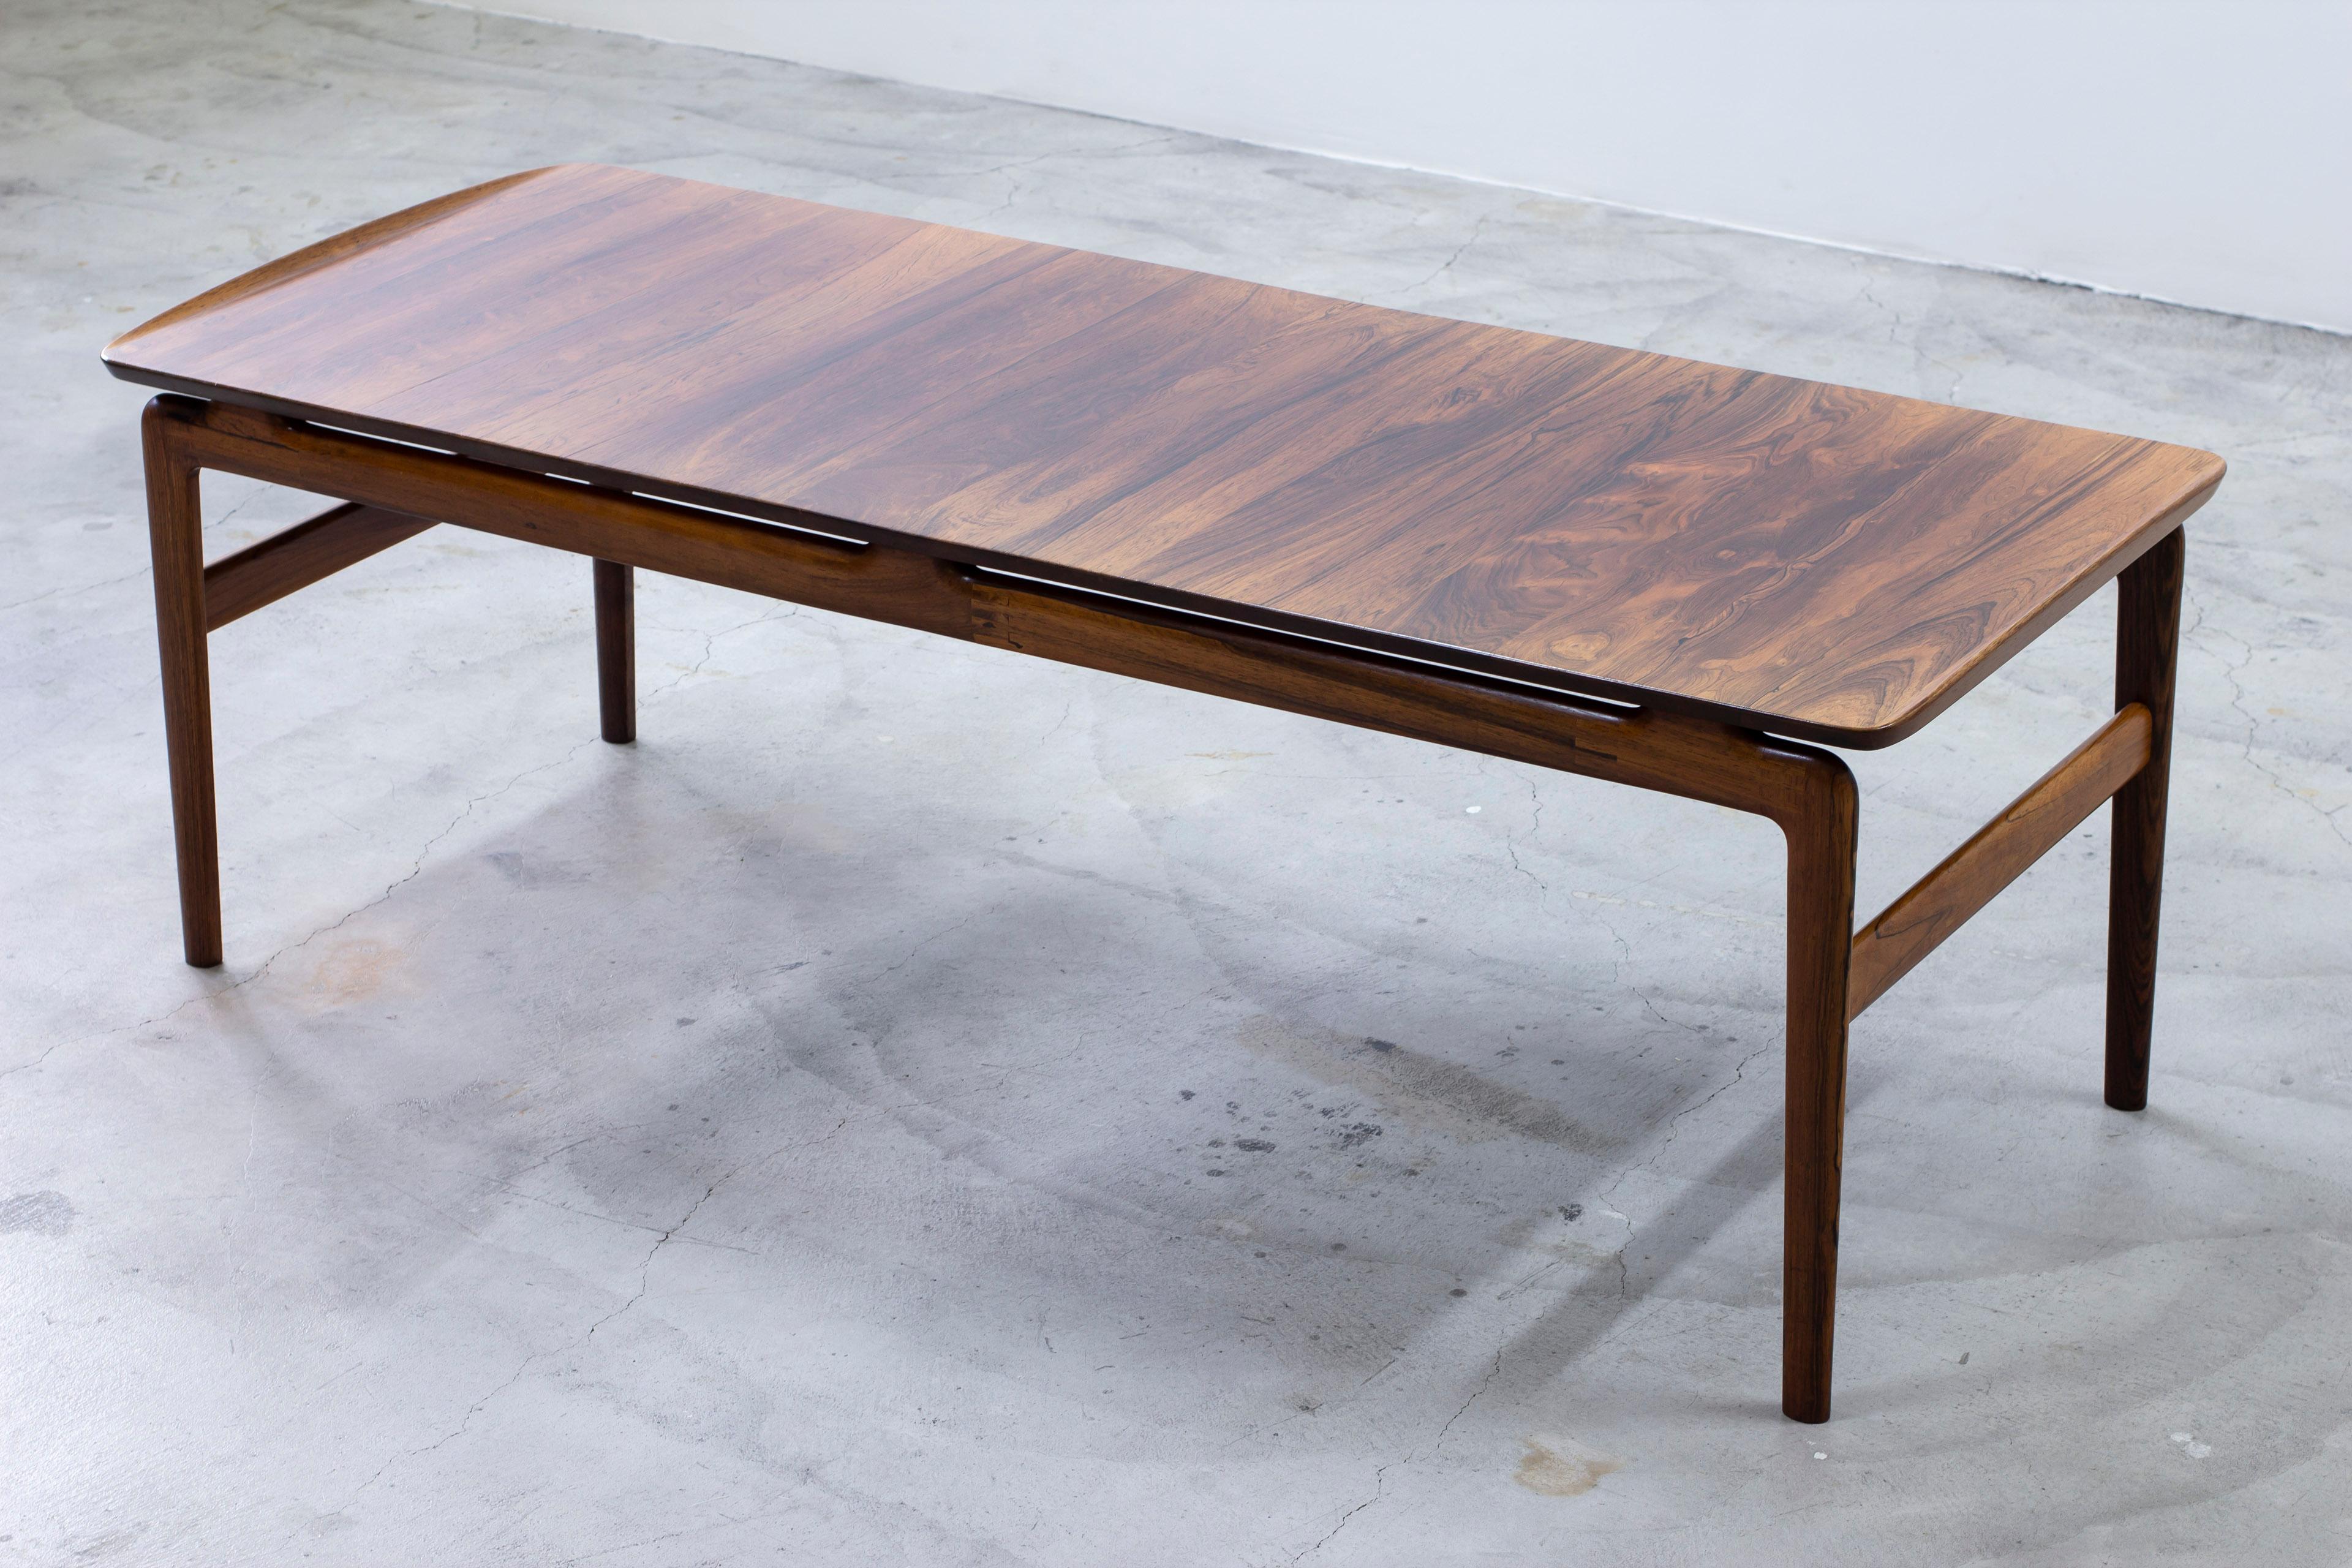 Sofa table designed by Peter Hvidt & Orla Mølgaard Nielsen. Produced in Denmark by France & Son during the 1960s. Made from thick solid palisander with very rich grain. Sliding formica tray underneath the table top. Very good vintage condition with